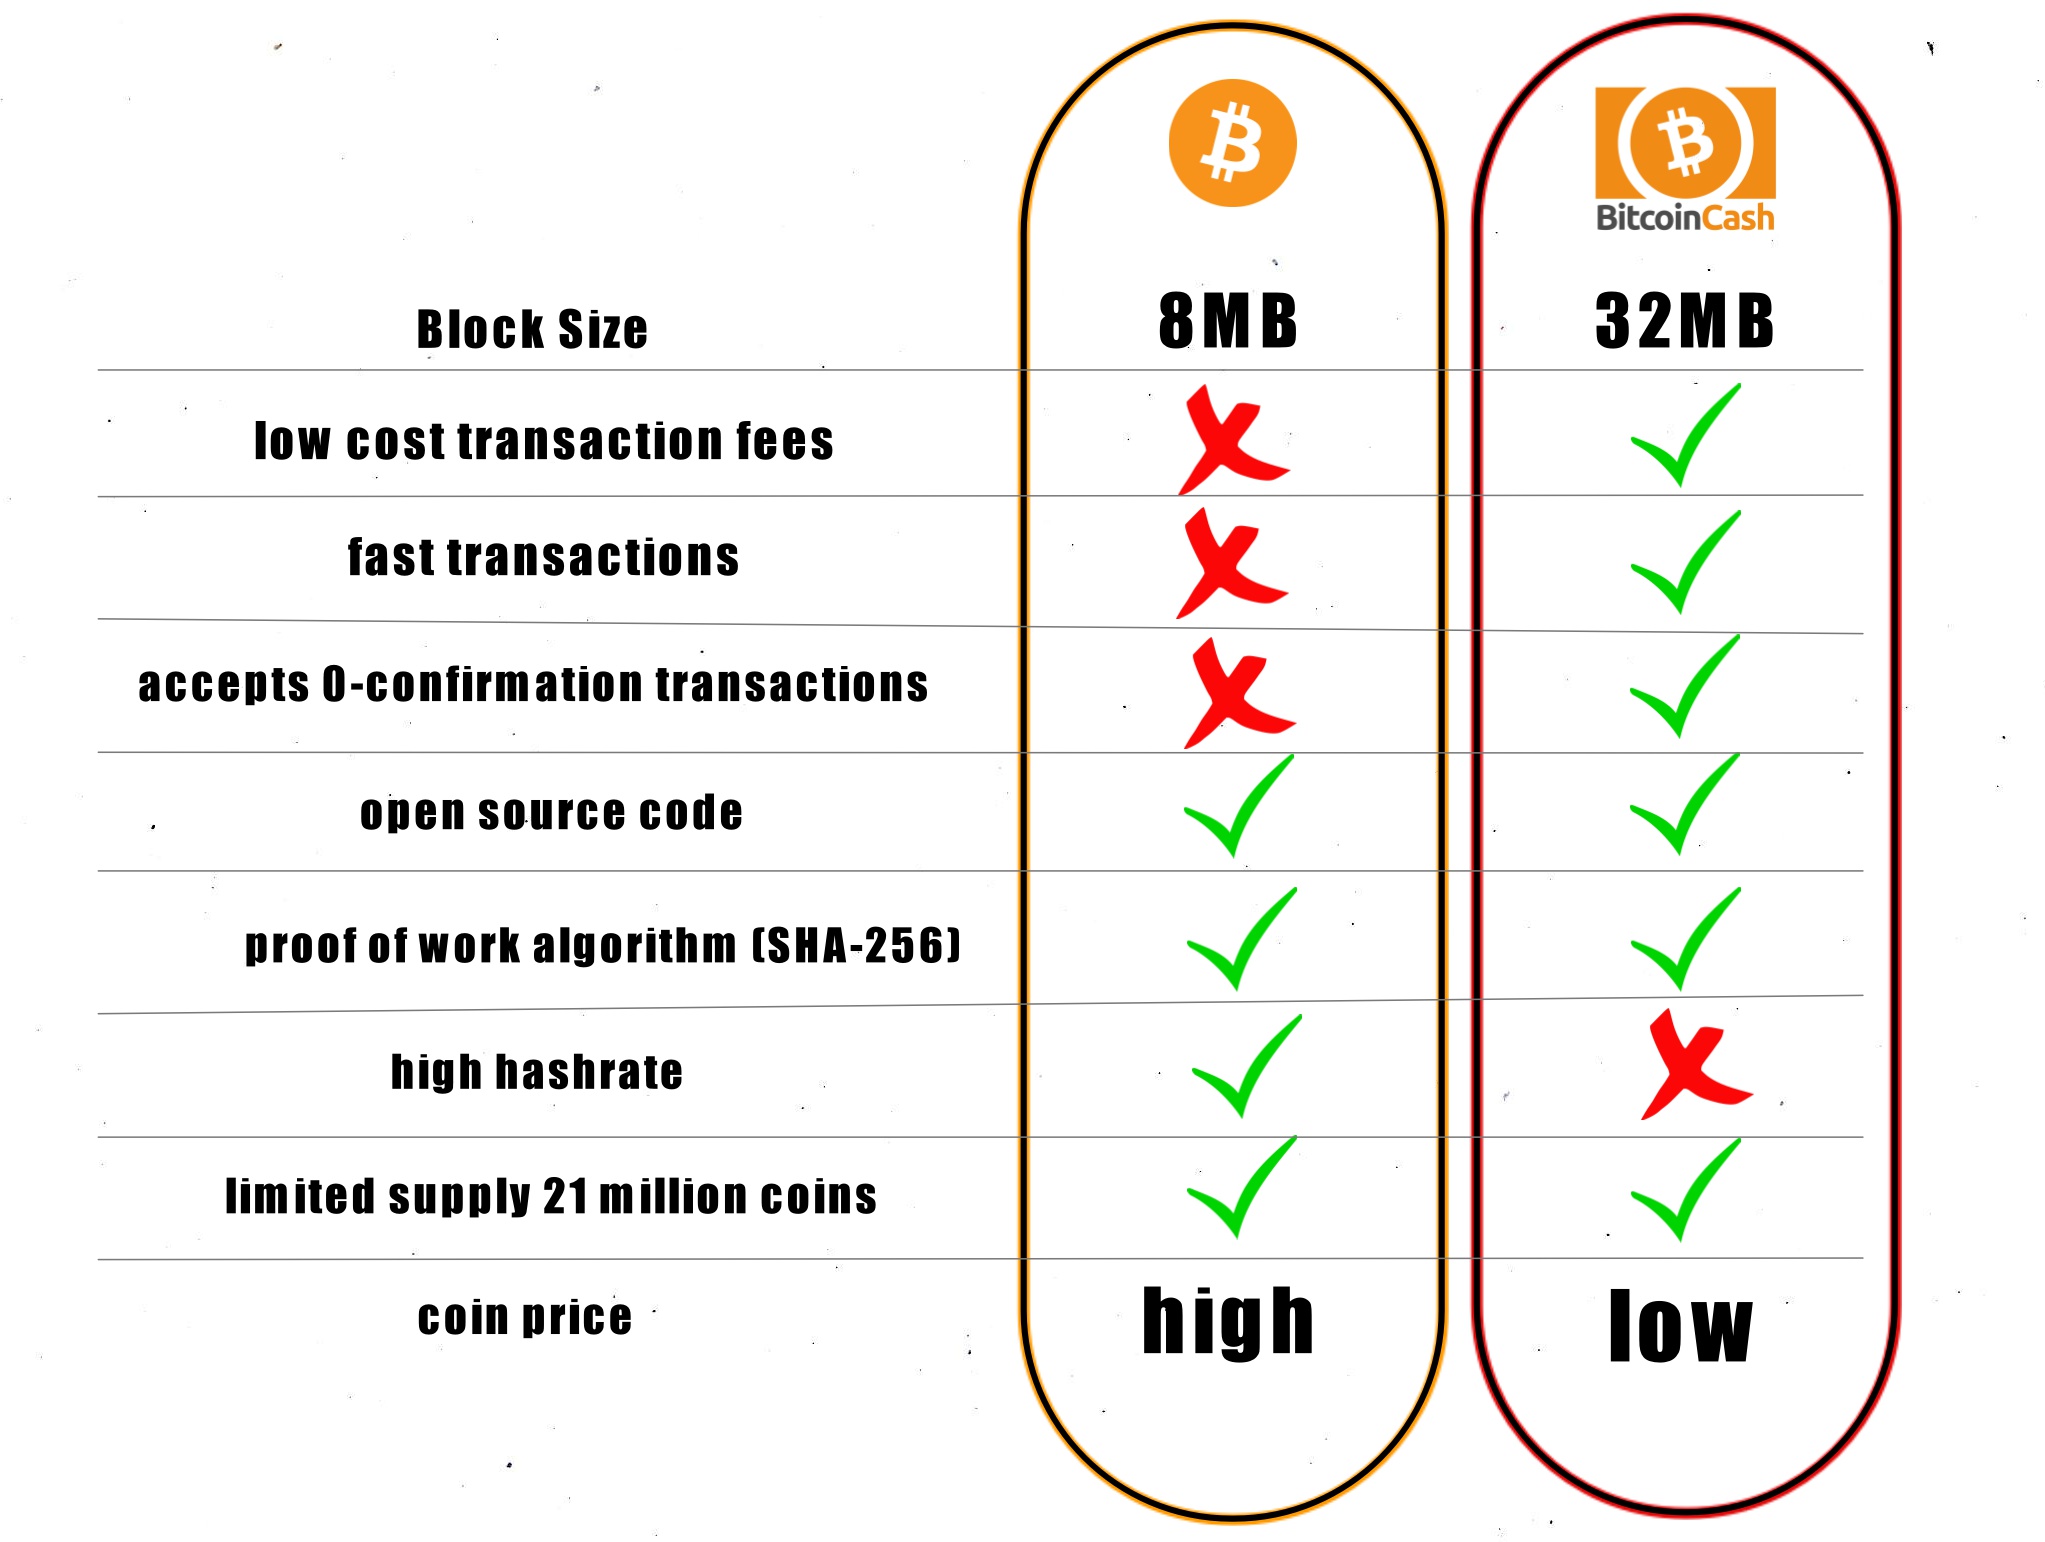 what is the difference in bitcoin and bitcoin cash